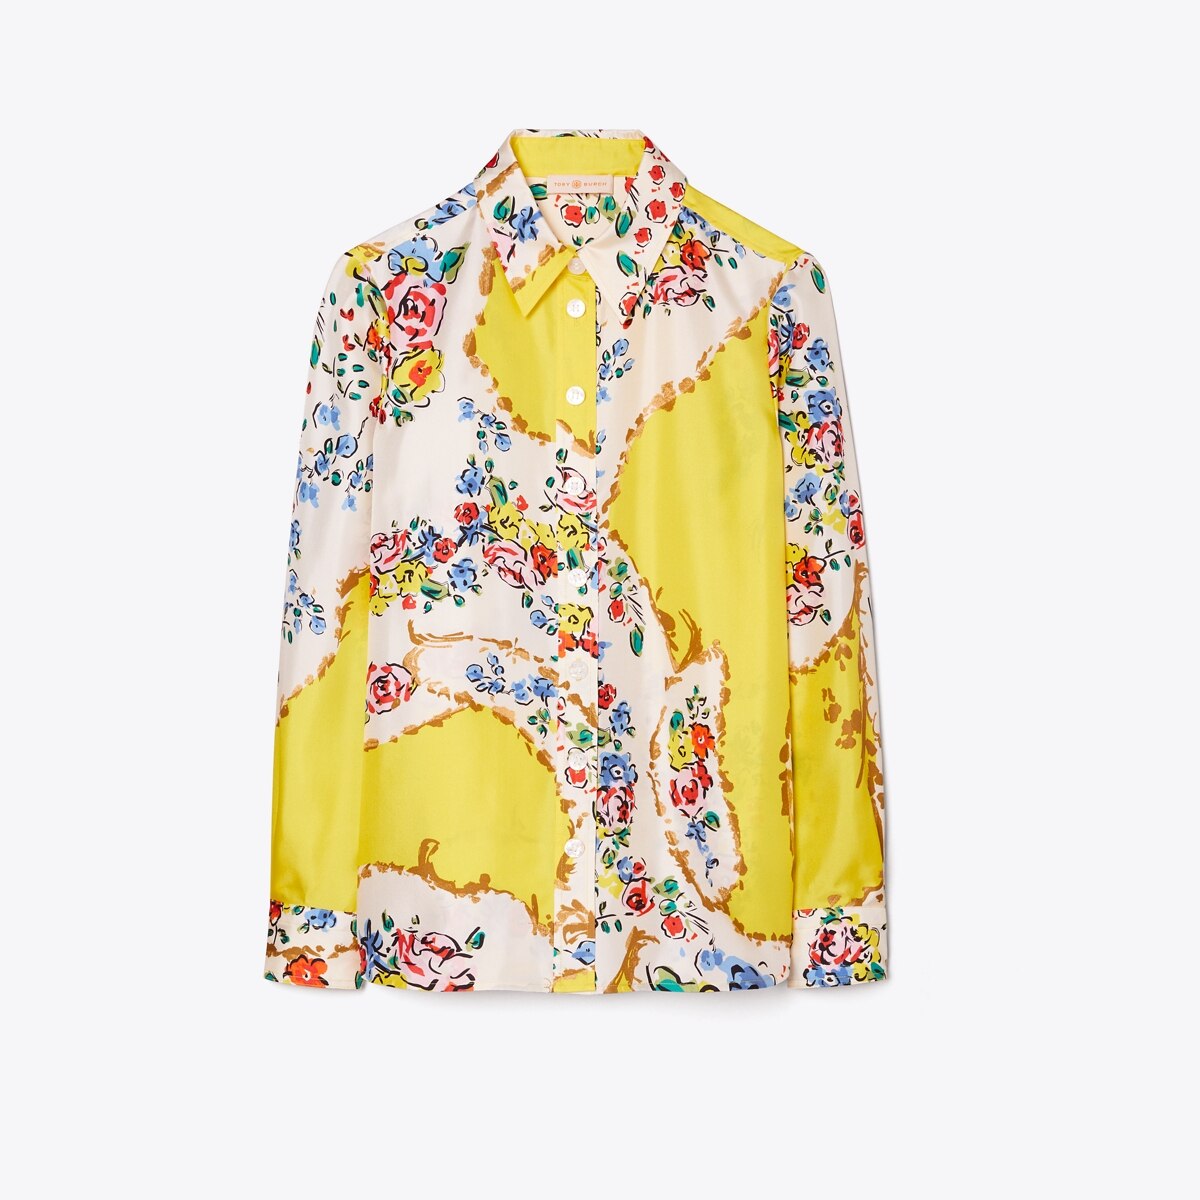 Tory Burch Yellow & Ivory Print Silk Blouse sz 6 – Michael's Consignment NYC